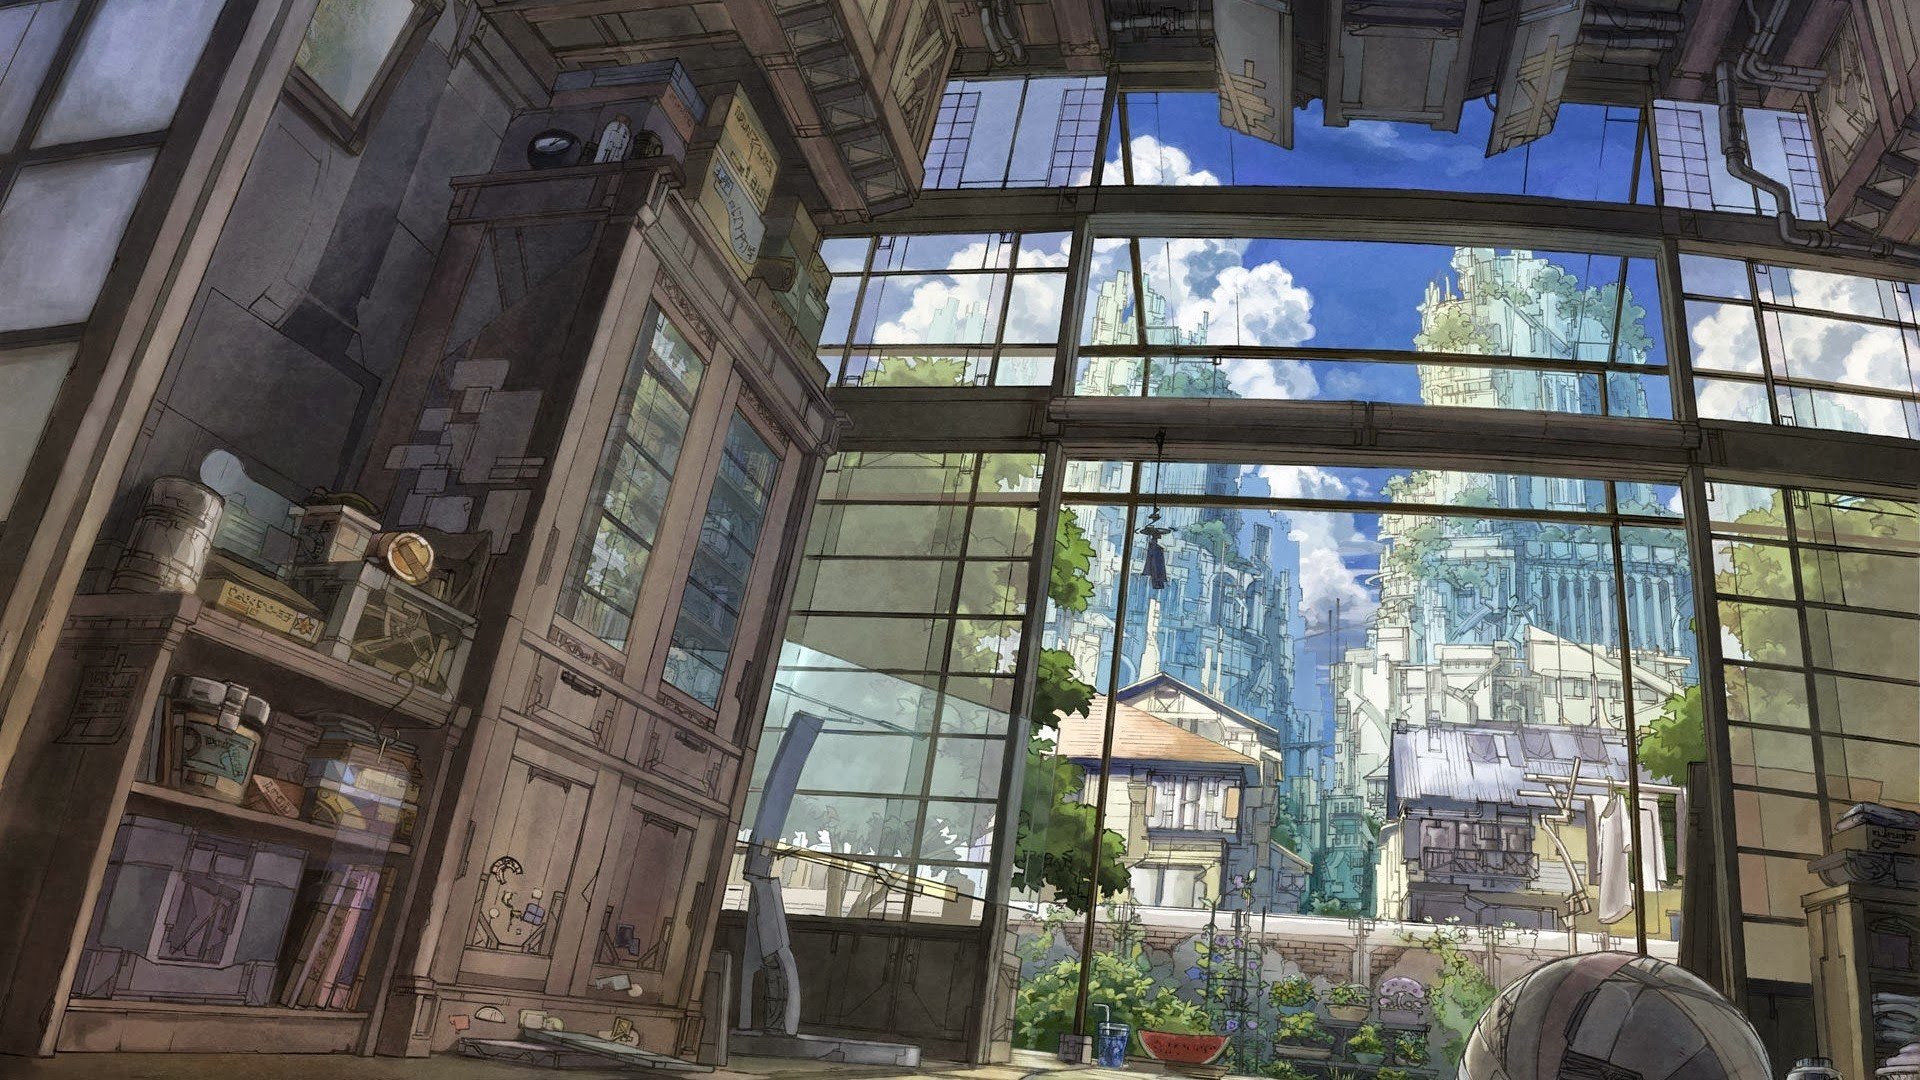 Anime Architecture : Imagined Worlds and Endless Megacities Book Review -  Halcyon Realms - Art Book Reviews - Anime, Manga, Film, Photography